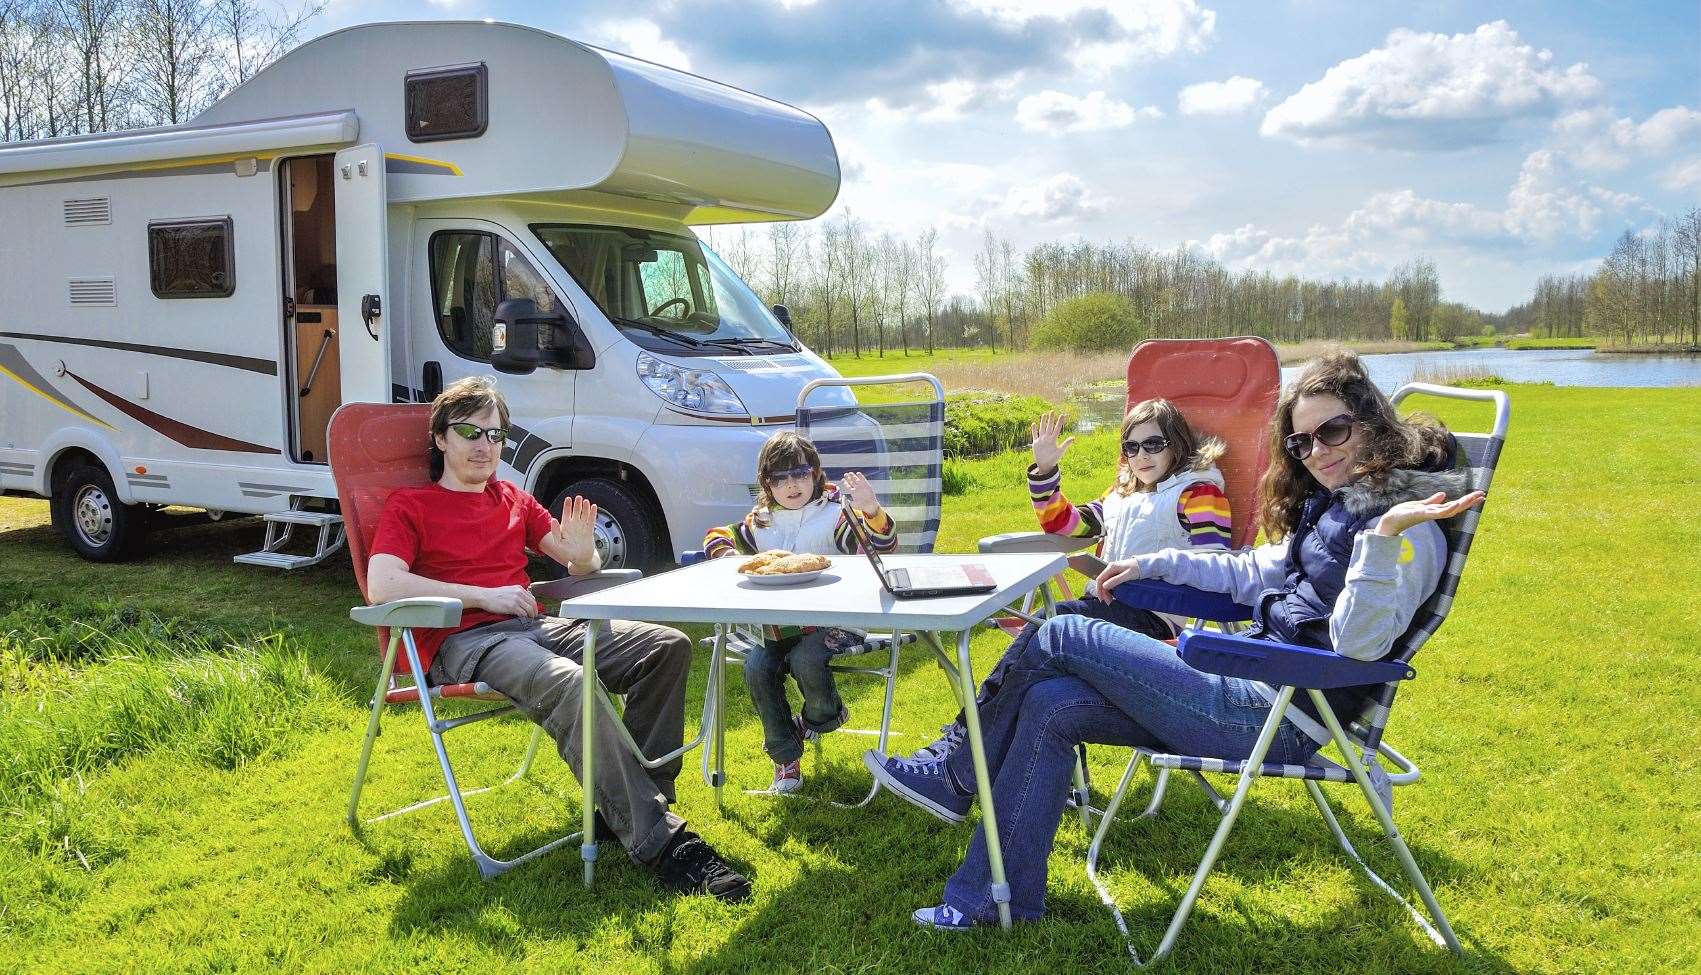 Some predict that motorhome and campervan holidays are set to boom after Brexit with people across the UK likely to give breaks abroad a miss.